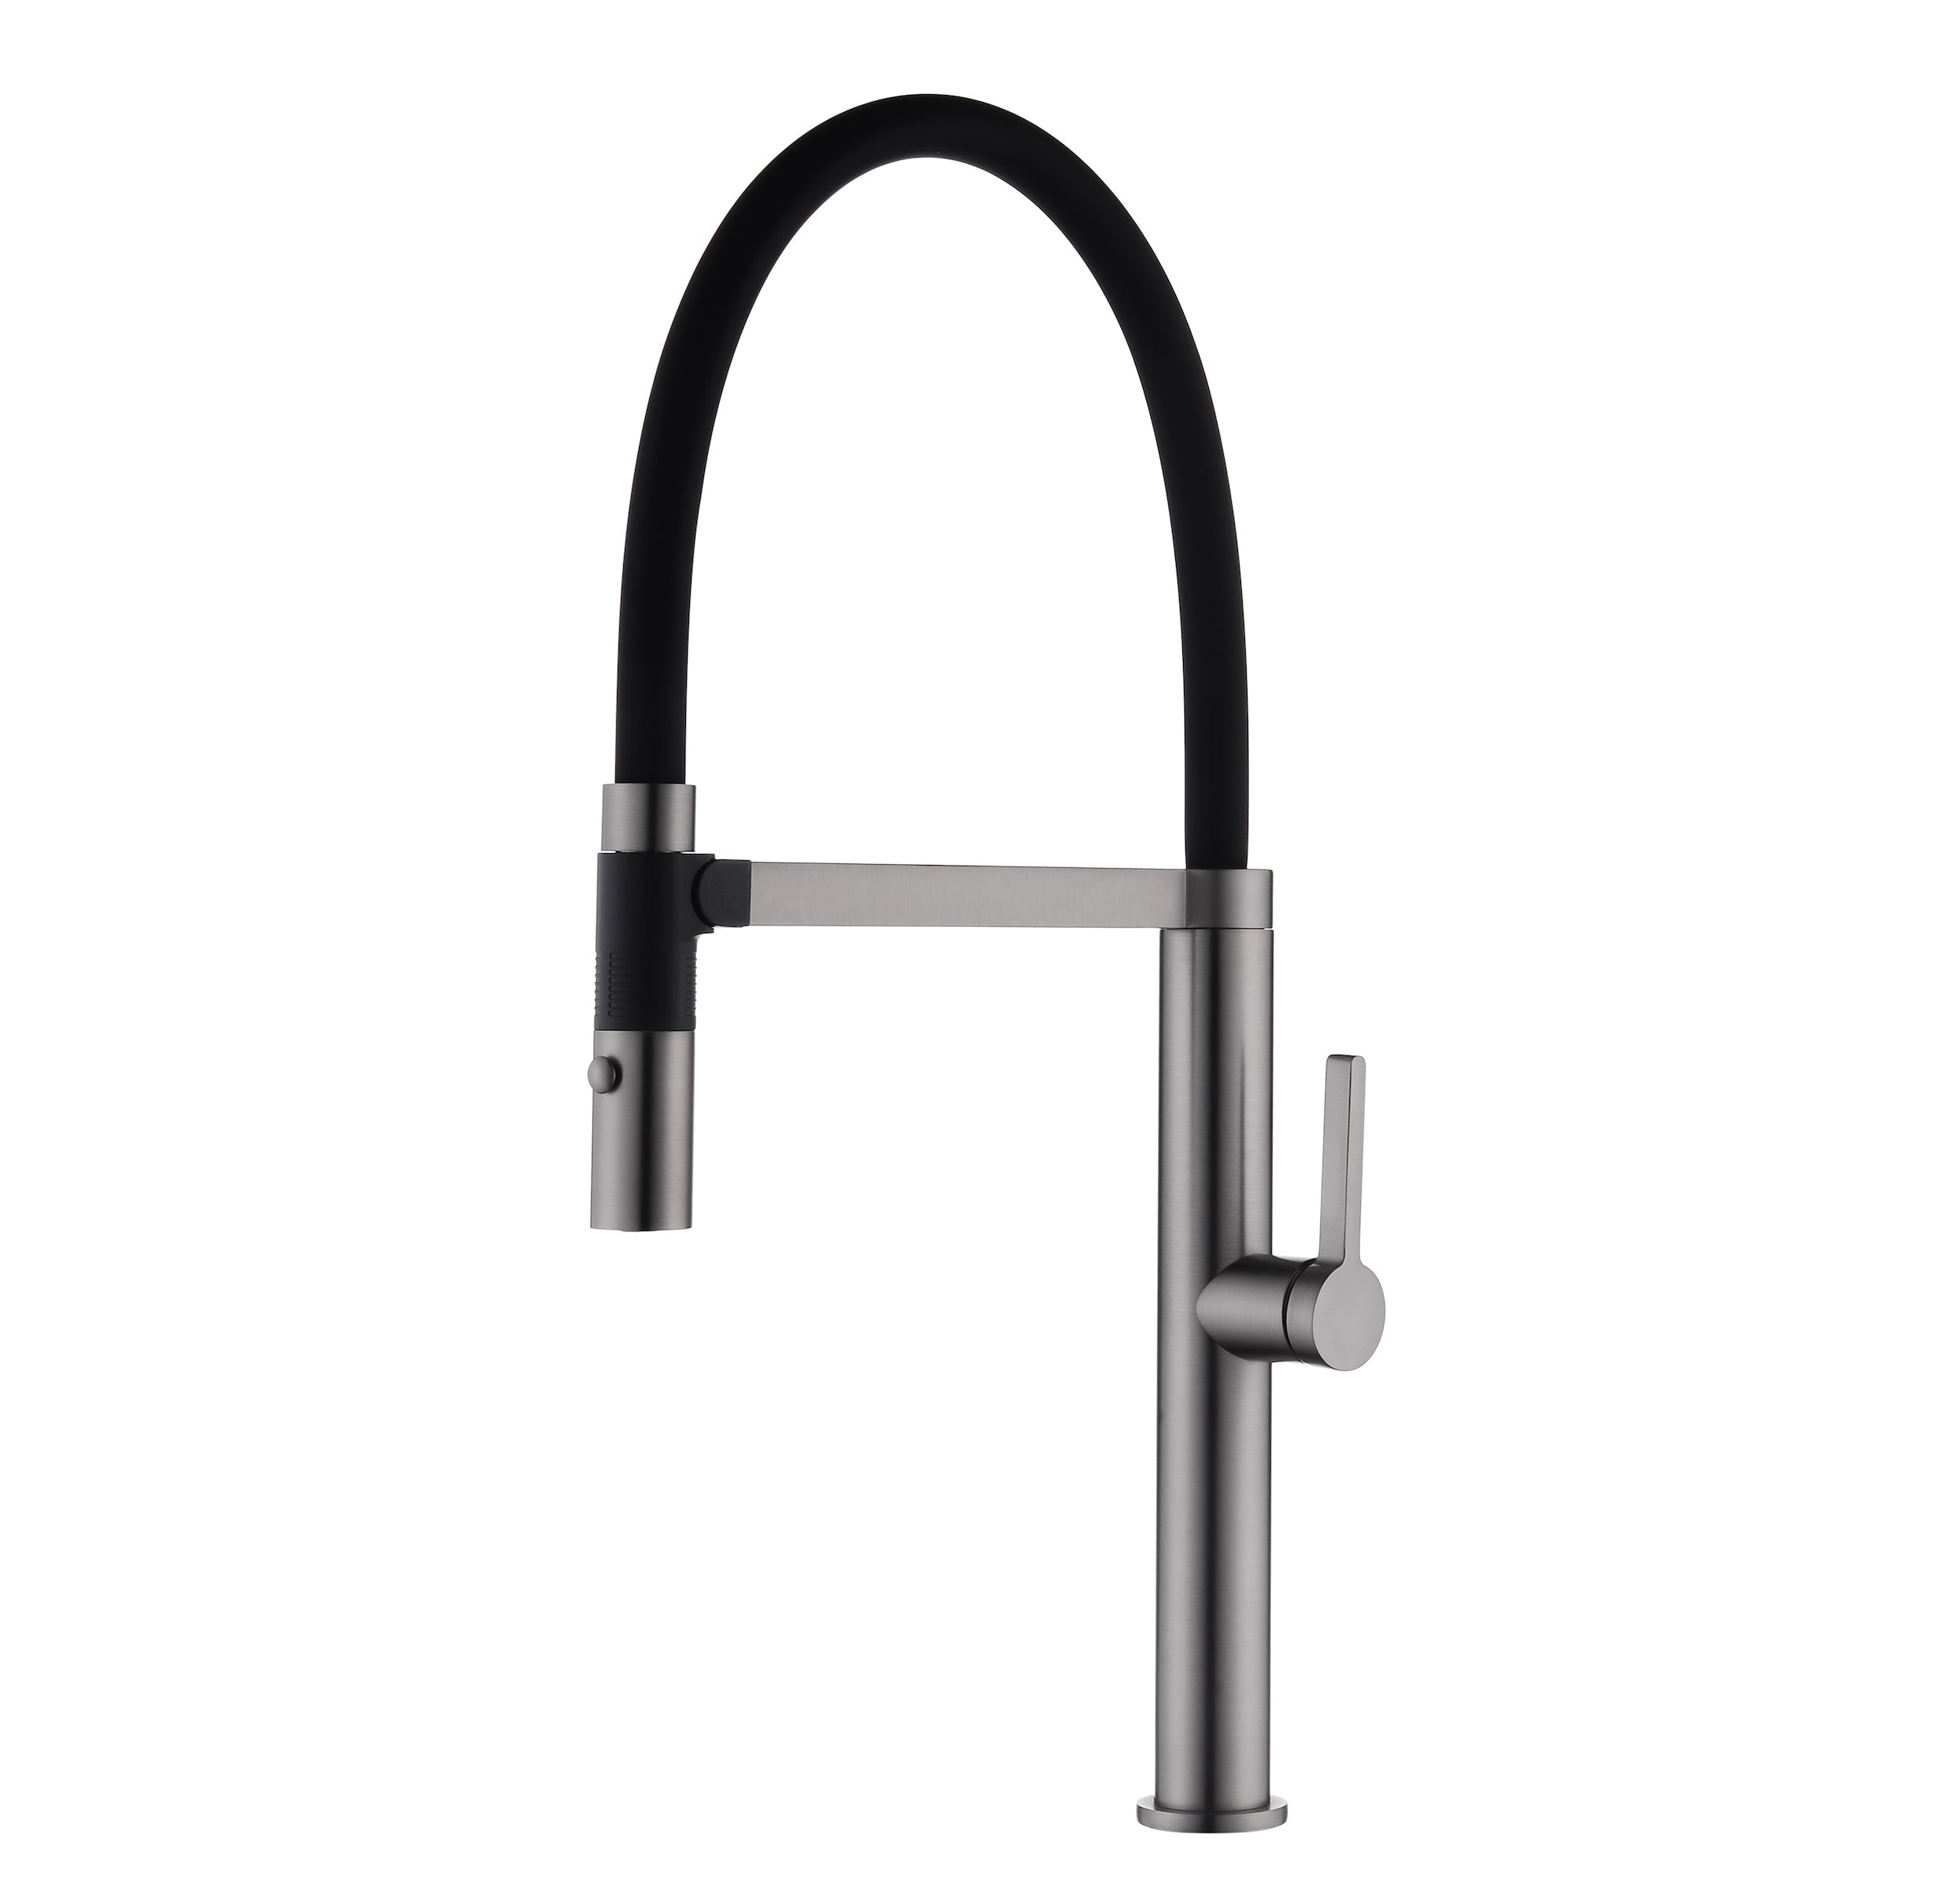 DAX Single Handle Pull Out Kitchen Faucet with Dual Sprayer, Brass Body and Shower Head, Gun Metal Finish, 9-3/16 x 21-5/8 Inches (DAX-S2417-01)